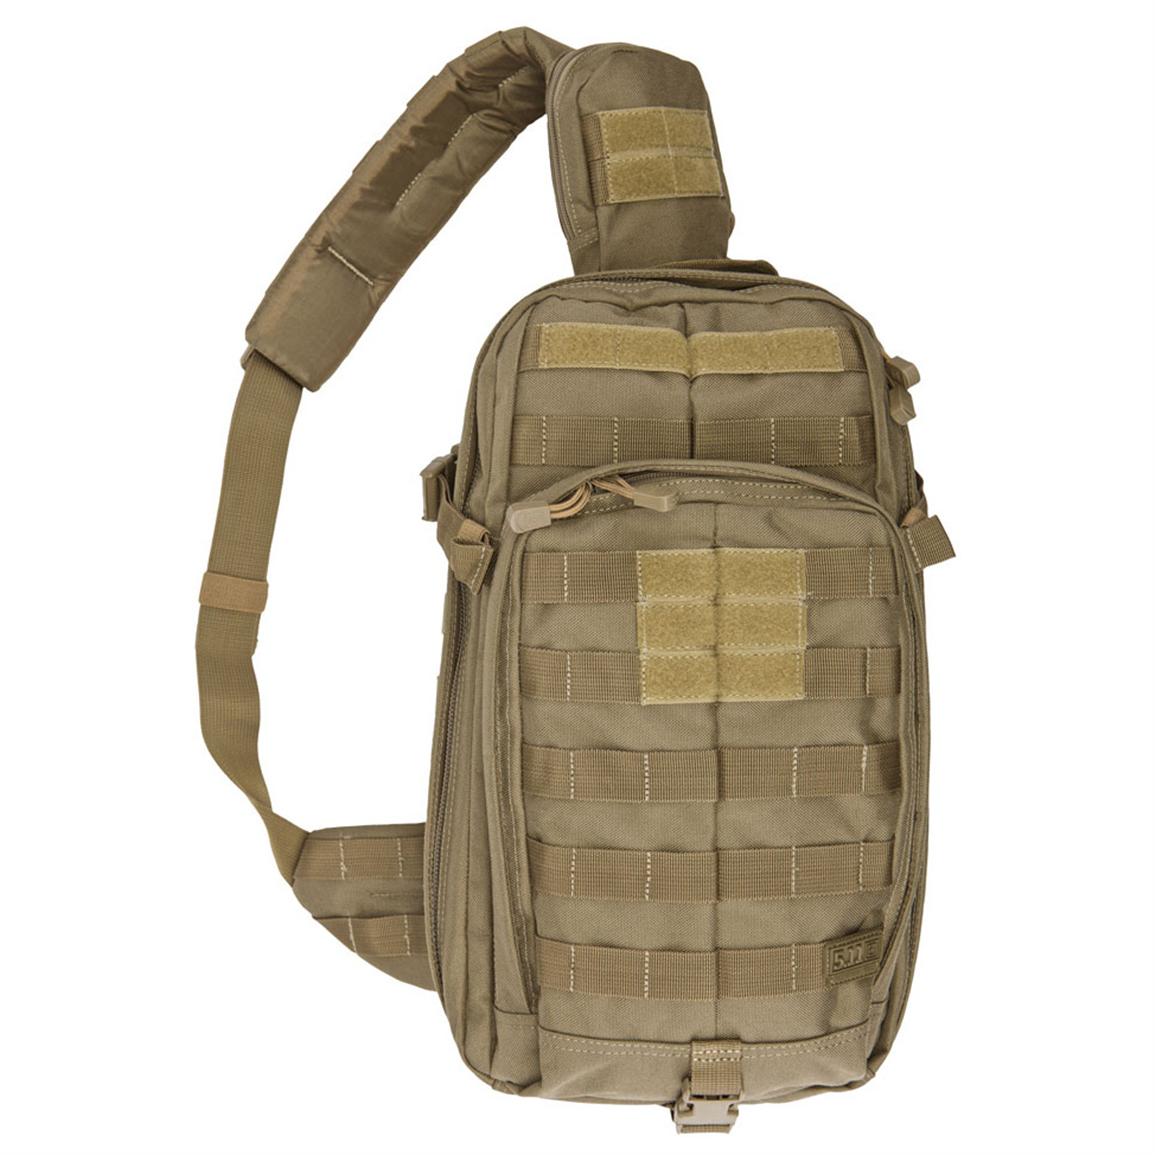 5.11 Tactical® RUSH MOAB 10 Pack - 230457, Military Style Backpacks ...